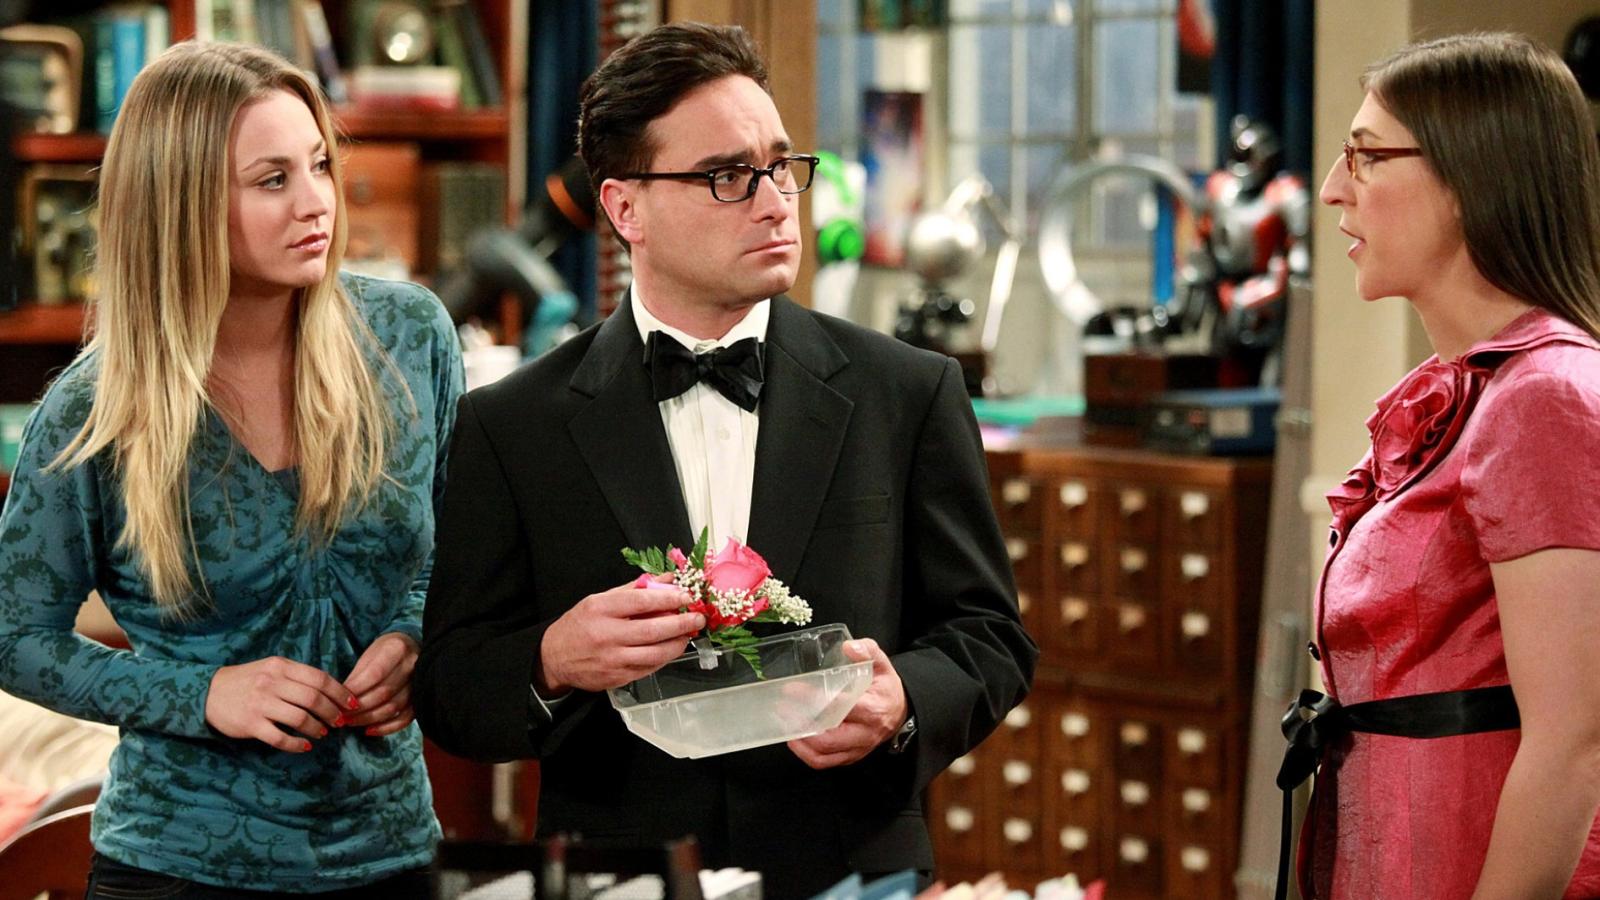 TBBT Character You'd Date, Marry, or Avoid Based on Your Zodiac Sign - image 6